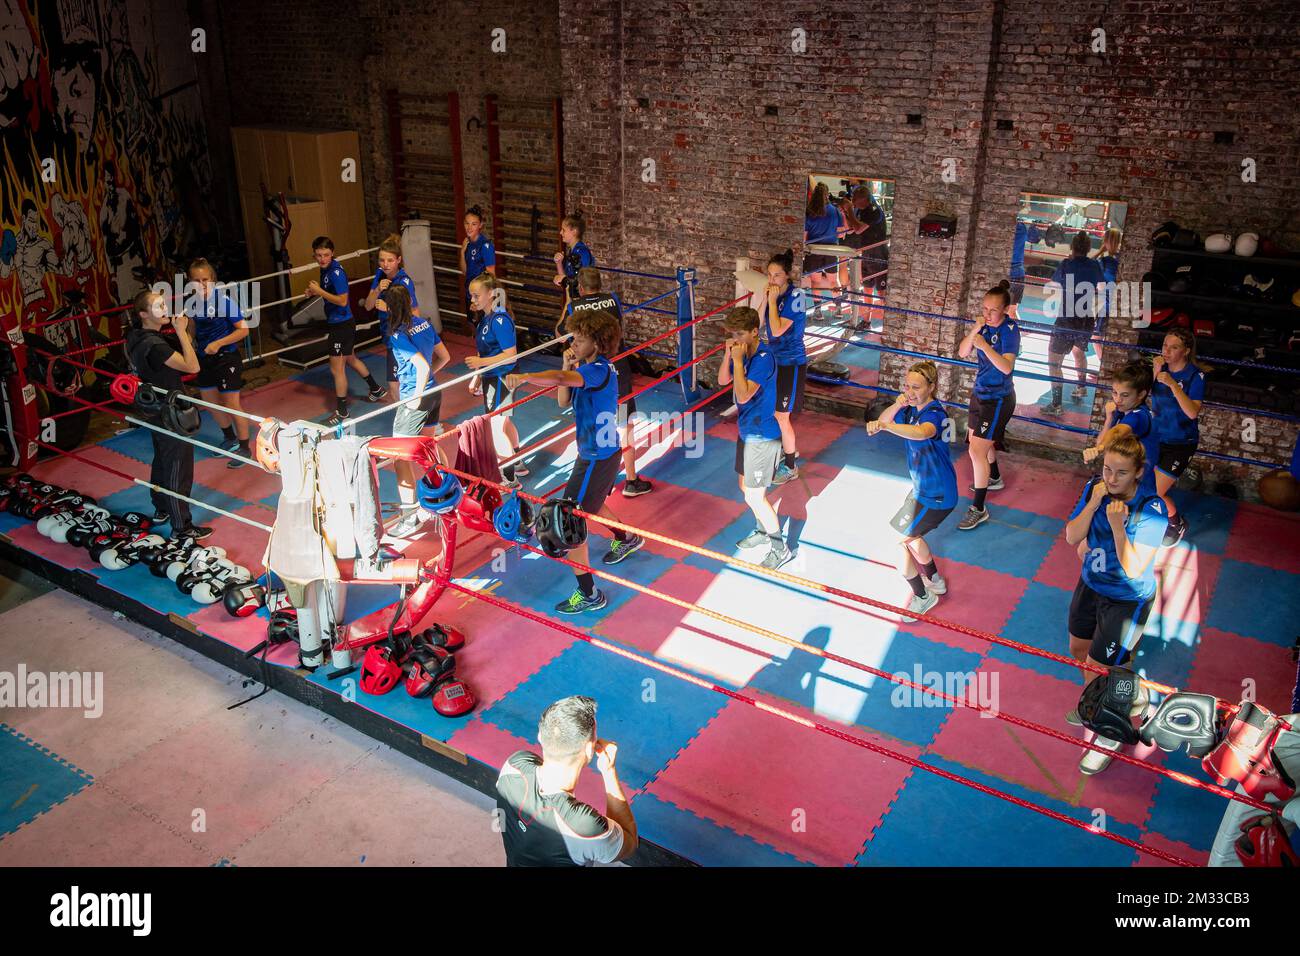 Club YLA's players pictured during a boxing training session for the Club Brugge Dames women's soccer team, at the boxing gym of Belgian Persoon in Lichtervelde, Friday 18 September 2020. BELGA PHOTO KURT DESPLENTER Stock Photo